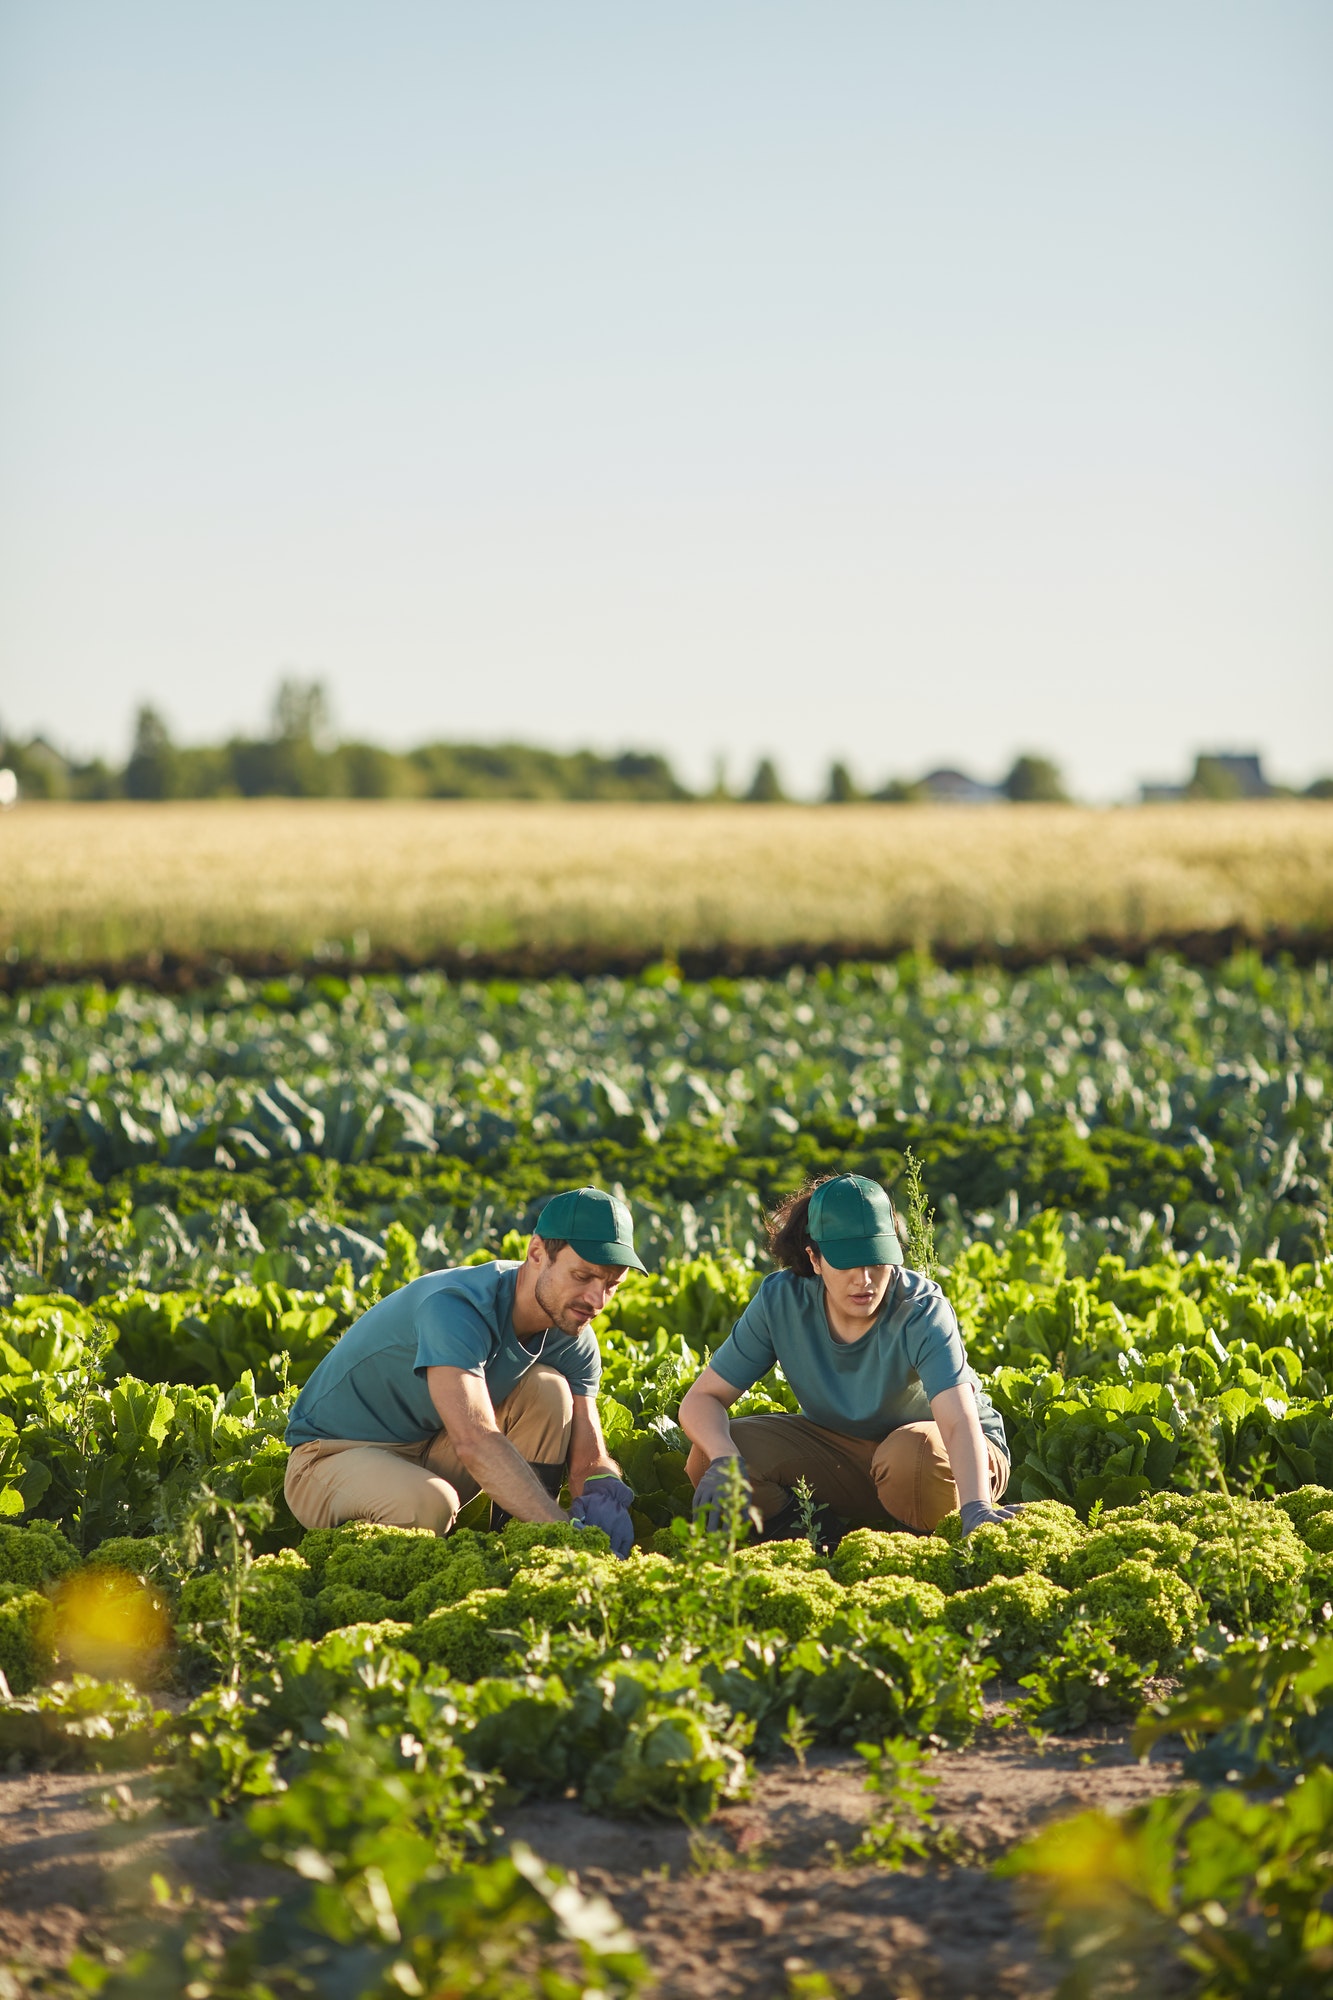 Two People Working at Vegetable Plantation